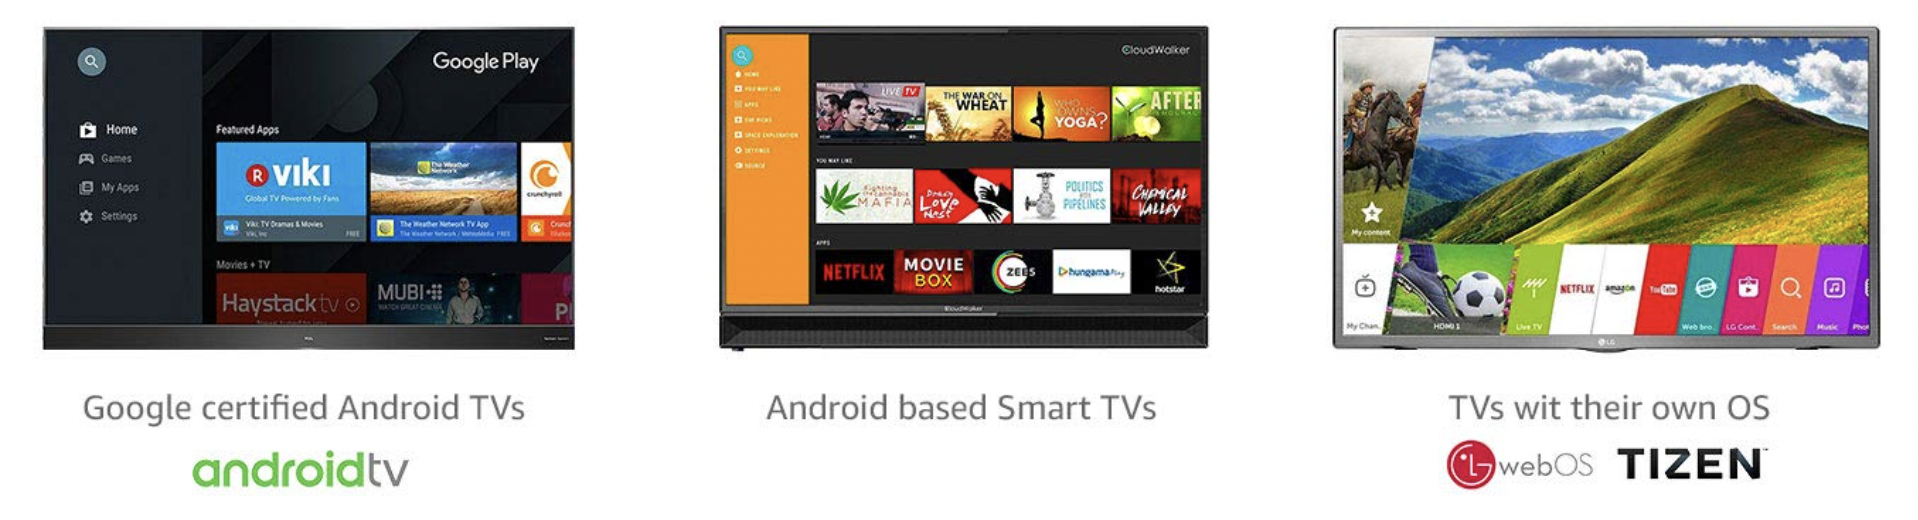 tv buying guide: TV Buying Guide - How to choose the right TV for the best  entertainment - The Economic Times